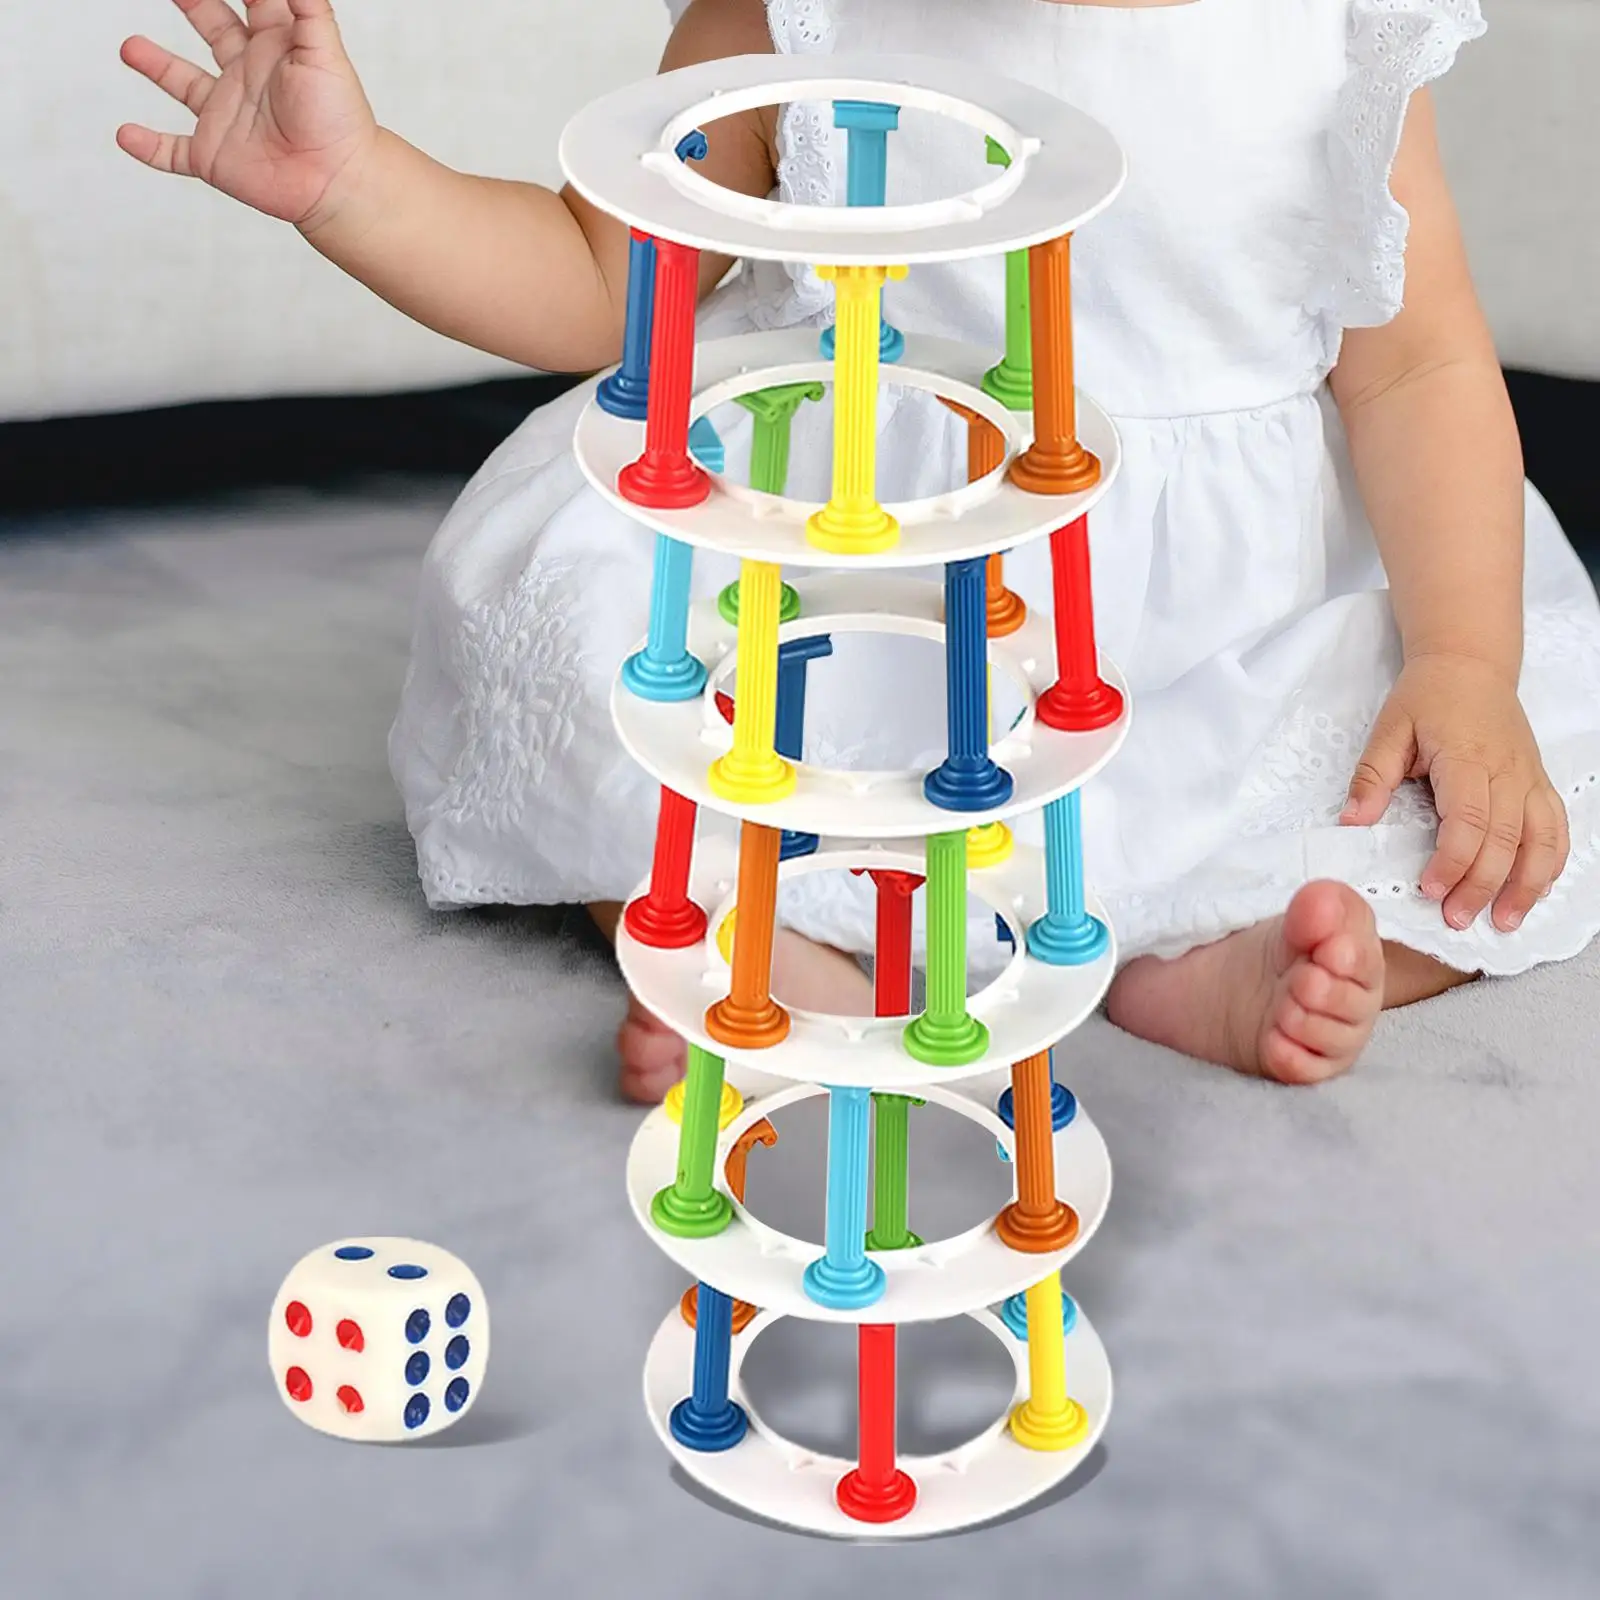 Classic Tumble Tower Game Balance Game Board Games with Dice Stacking Game for Family Game Indoor ,Entertaining Party Game